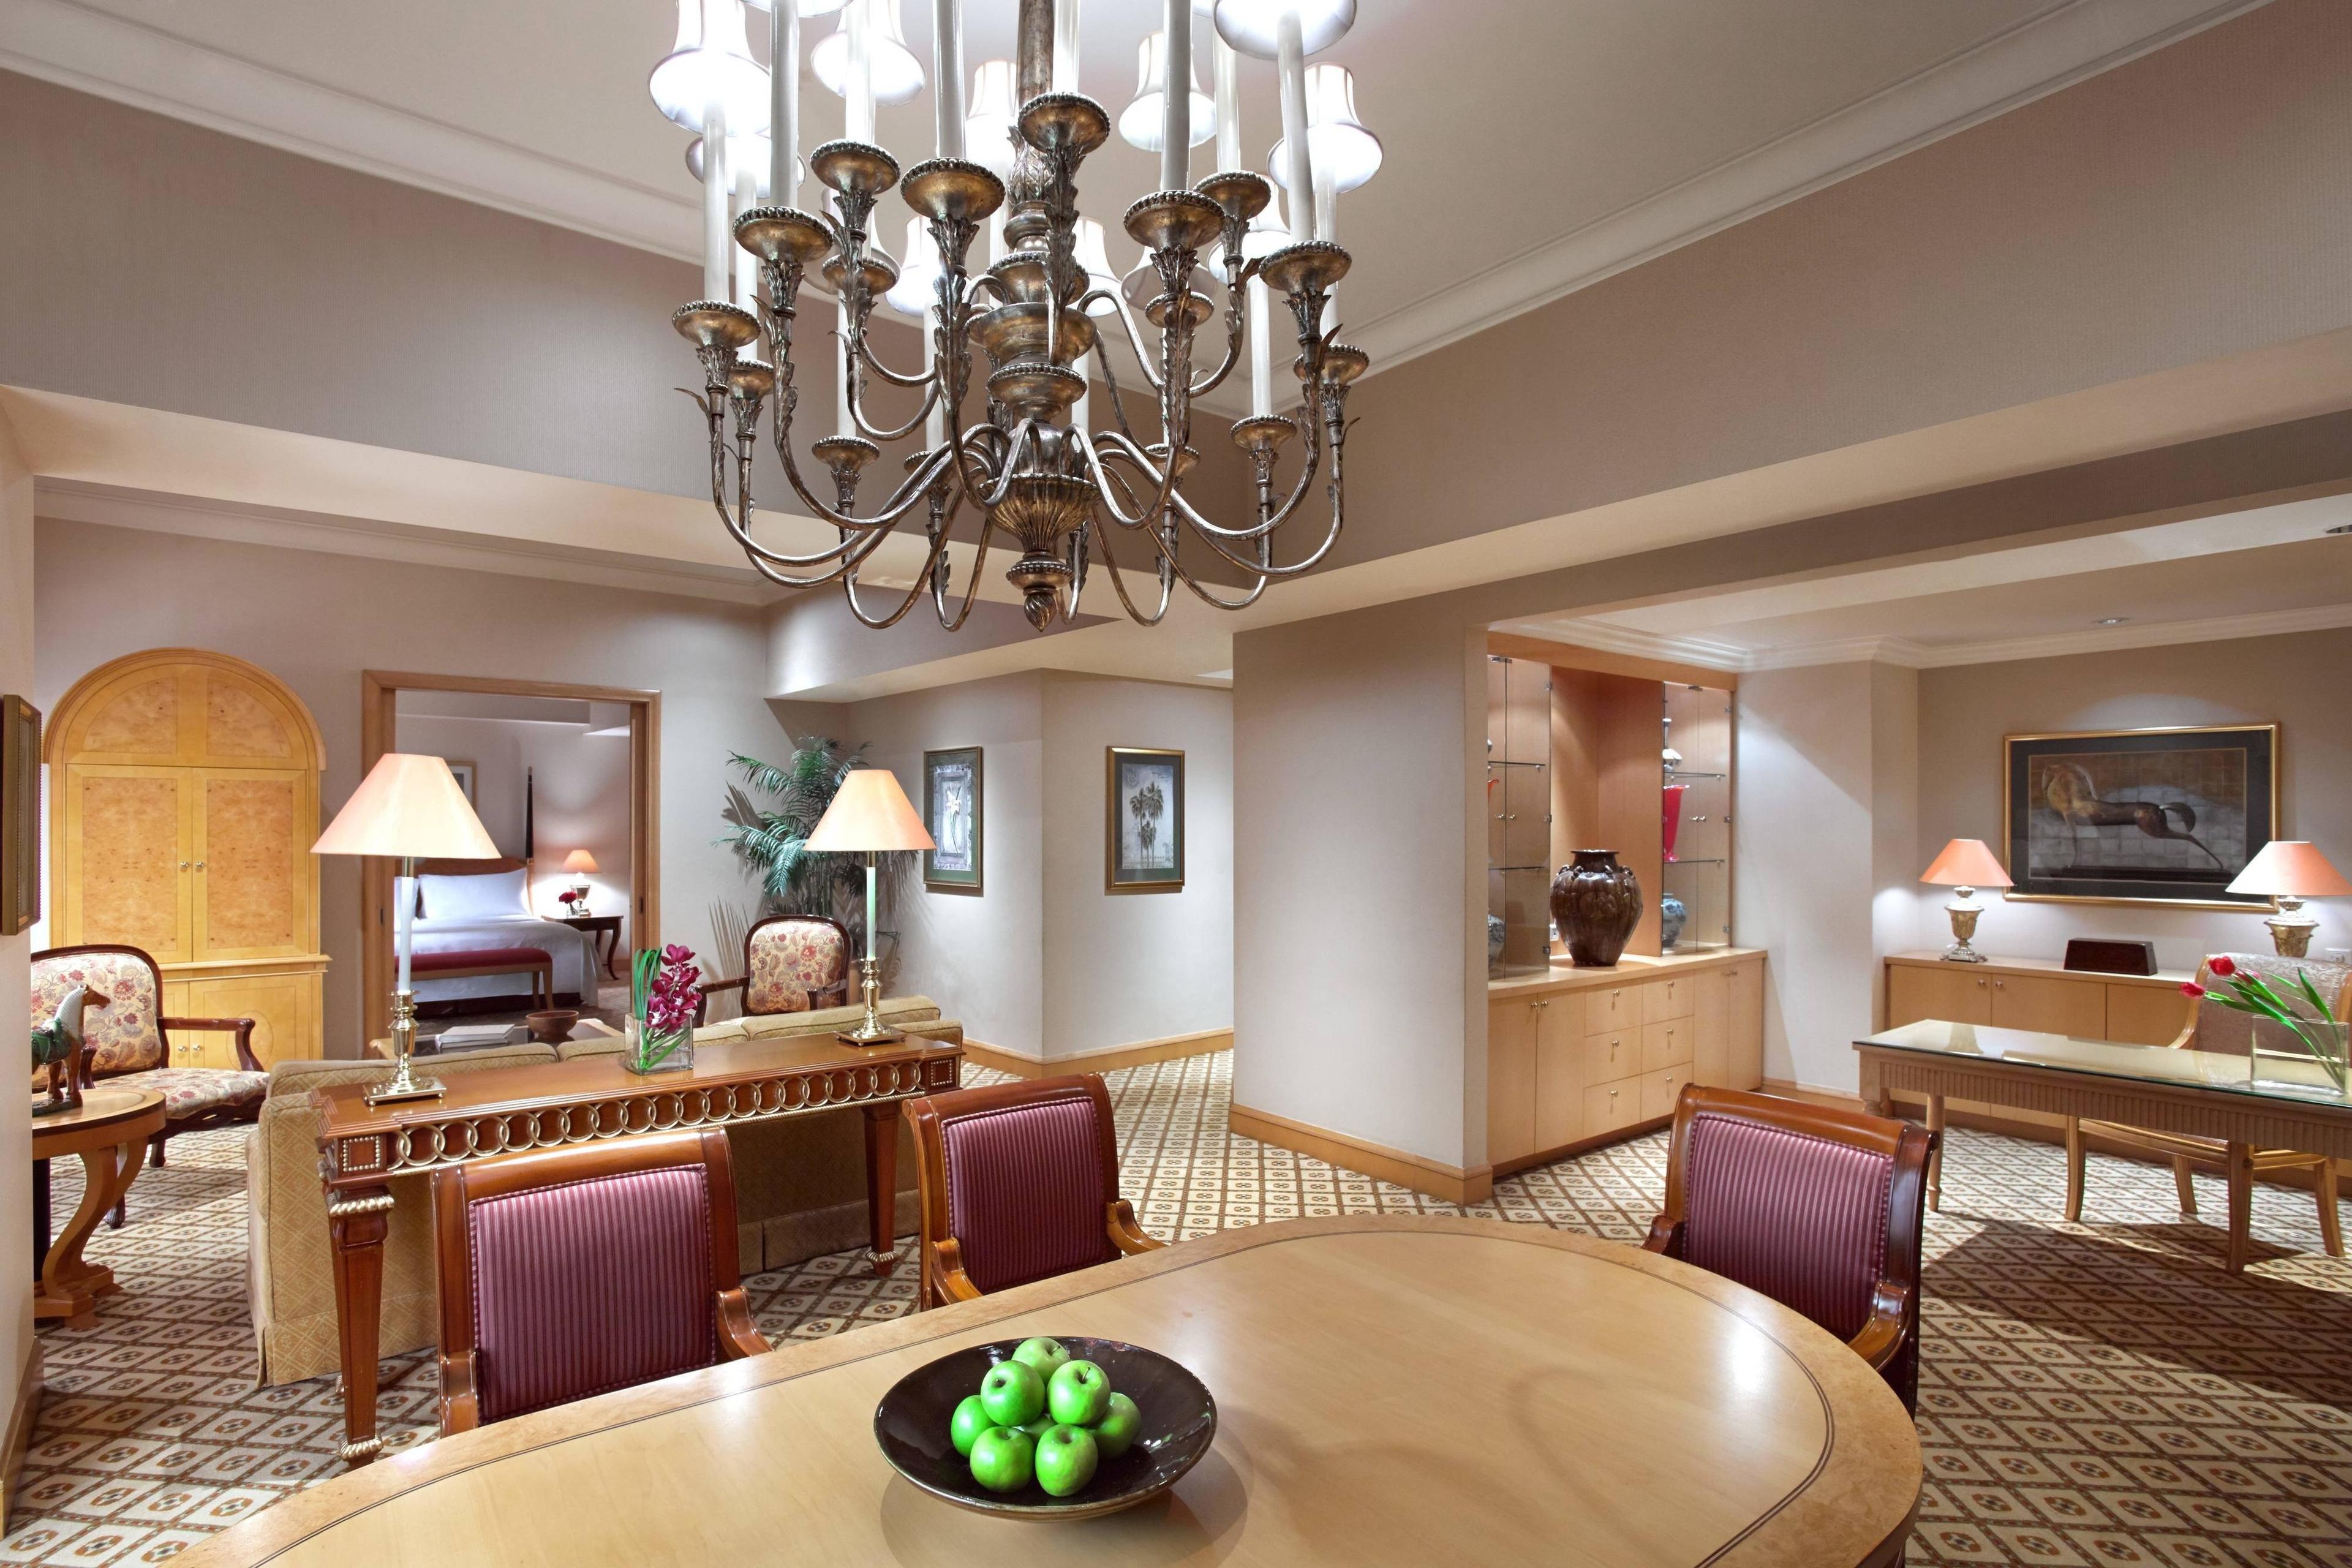 The elegantly appointed Diplomat Suite includes a spacious dining area, dedicated working area and an inviting living room to entertain guests.